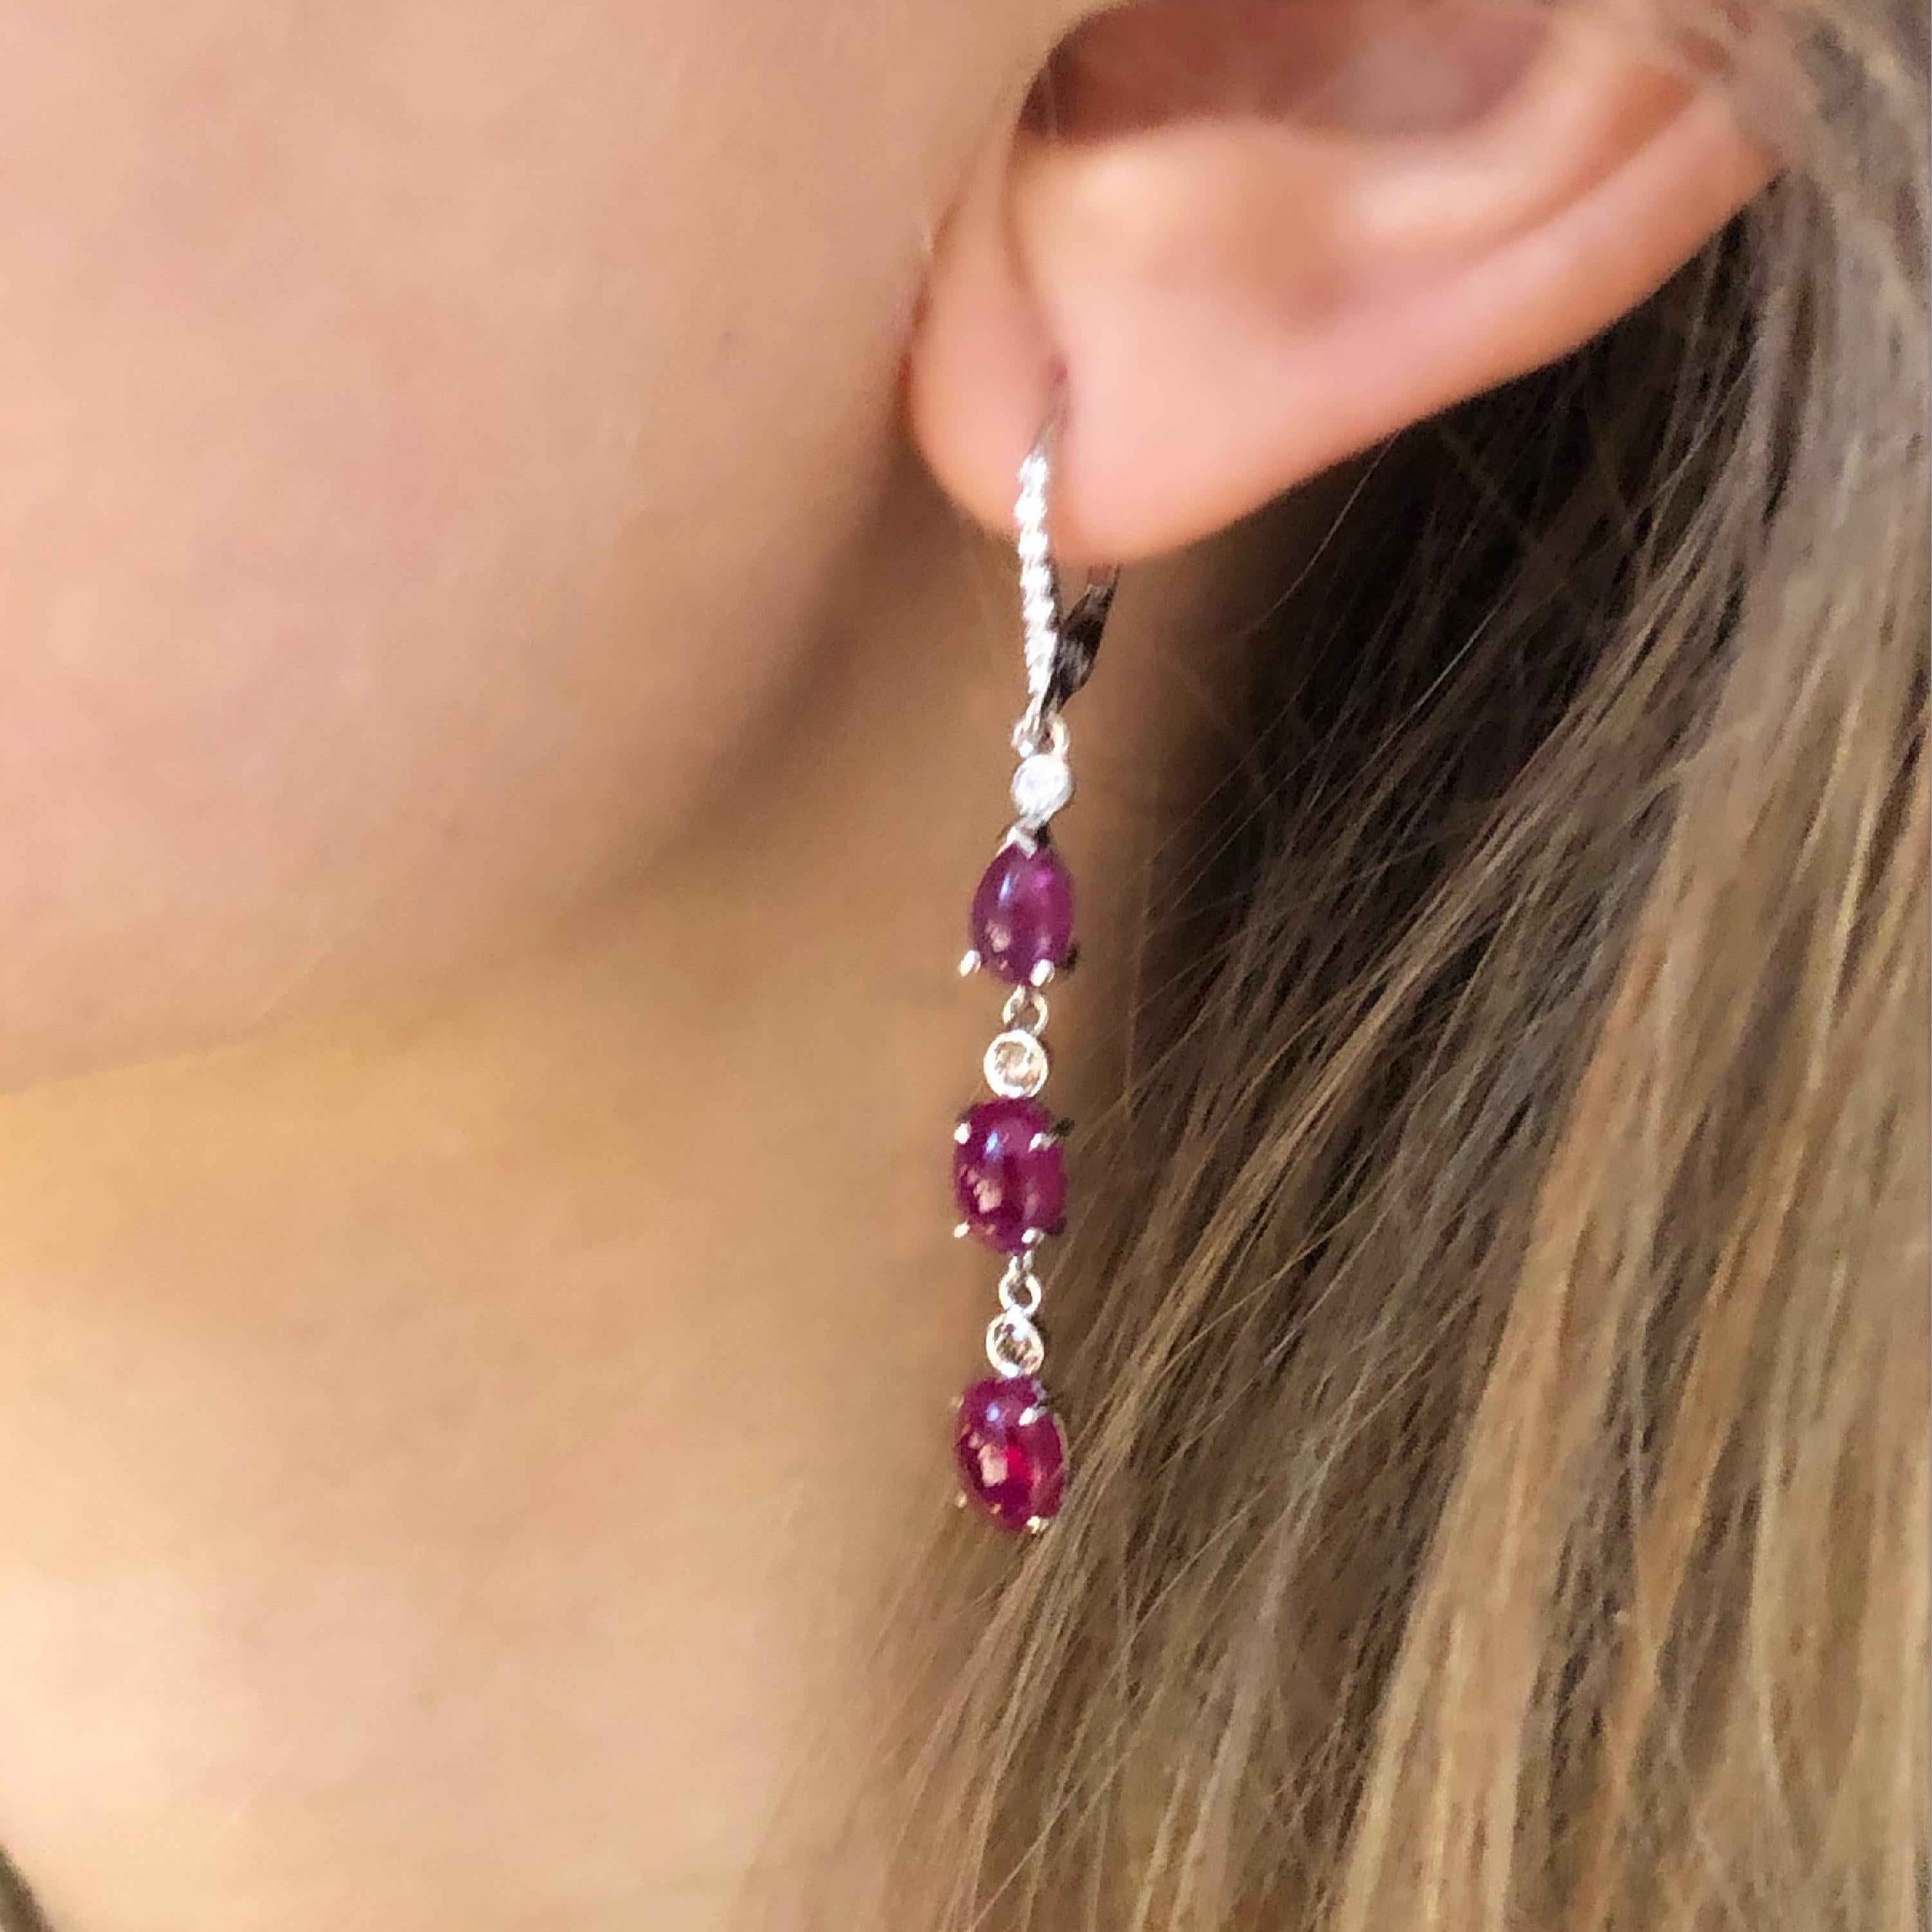 Contemporary Diamond Gold Hoop Earrings with Burma Cabochon Ruby Weighing 8.27 Carat